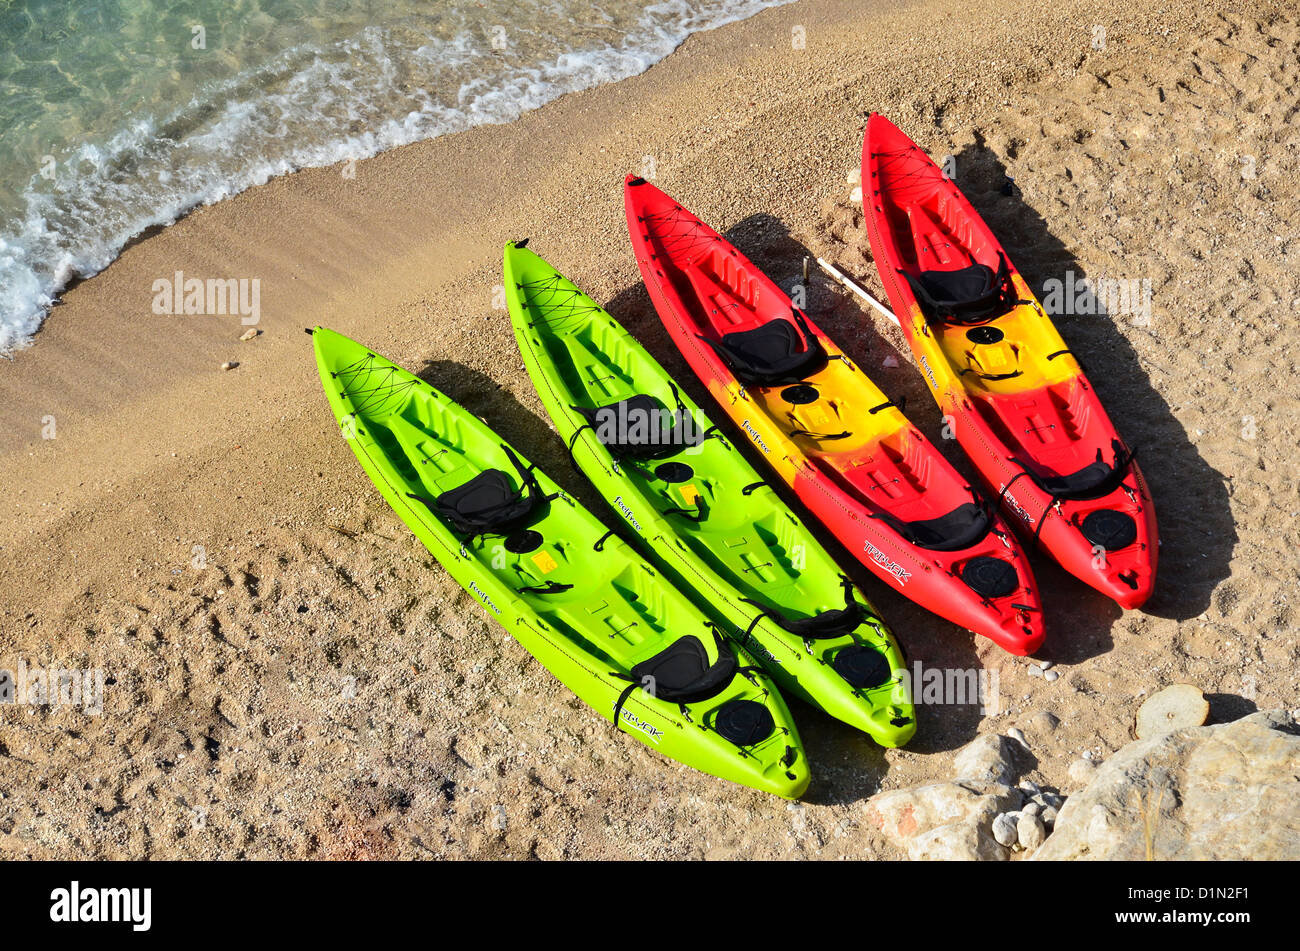 Very coloured canoe boats on a beach outside the old city walls of Dubrovnik, Croatia Stock Photo